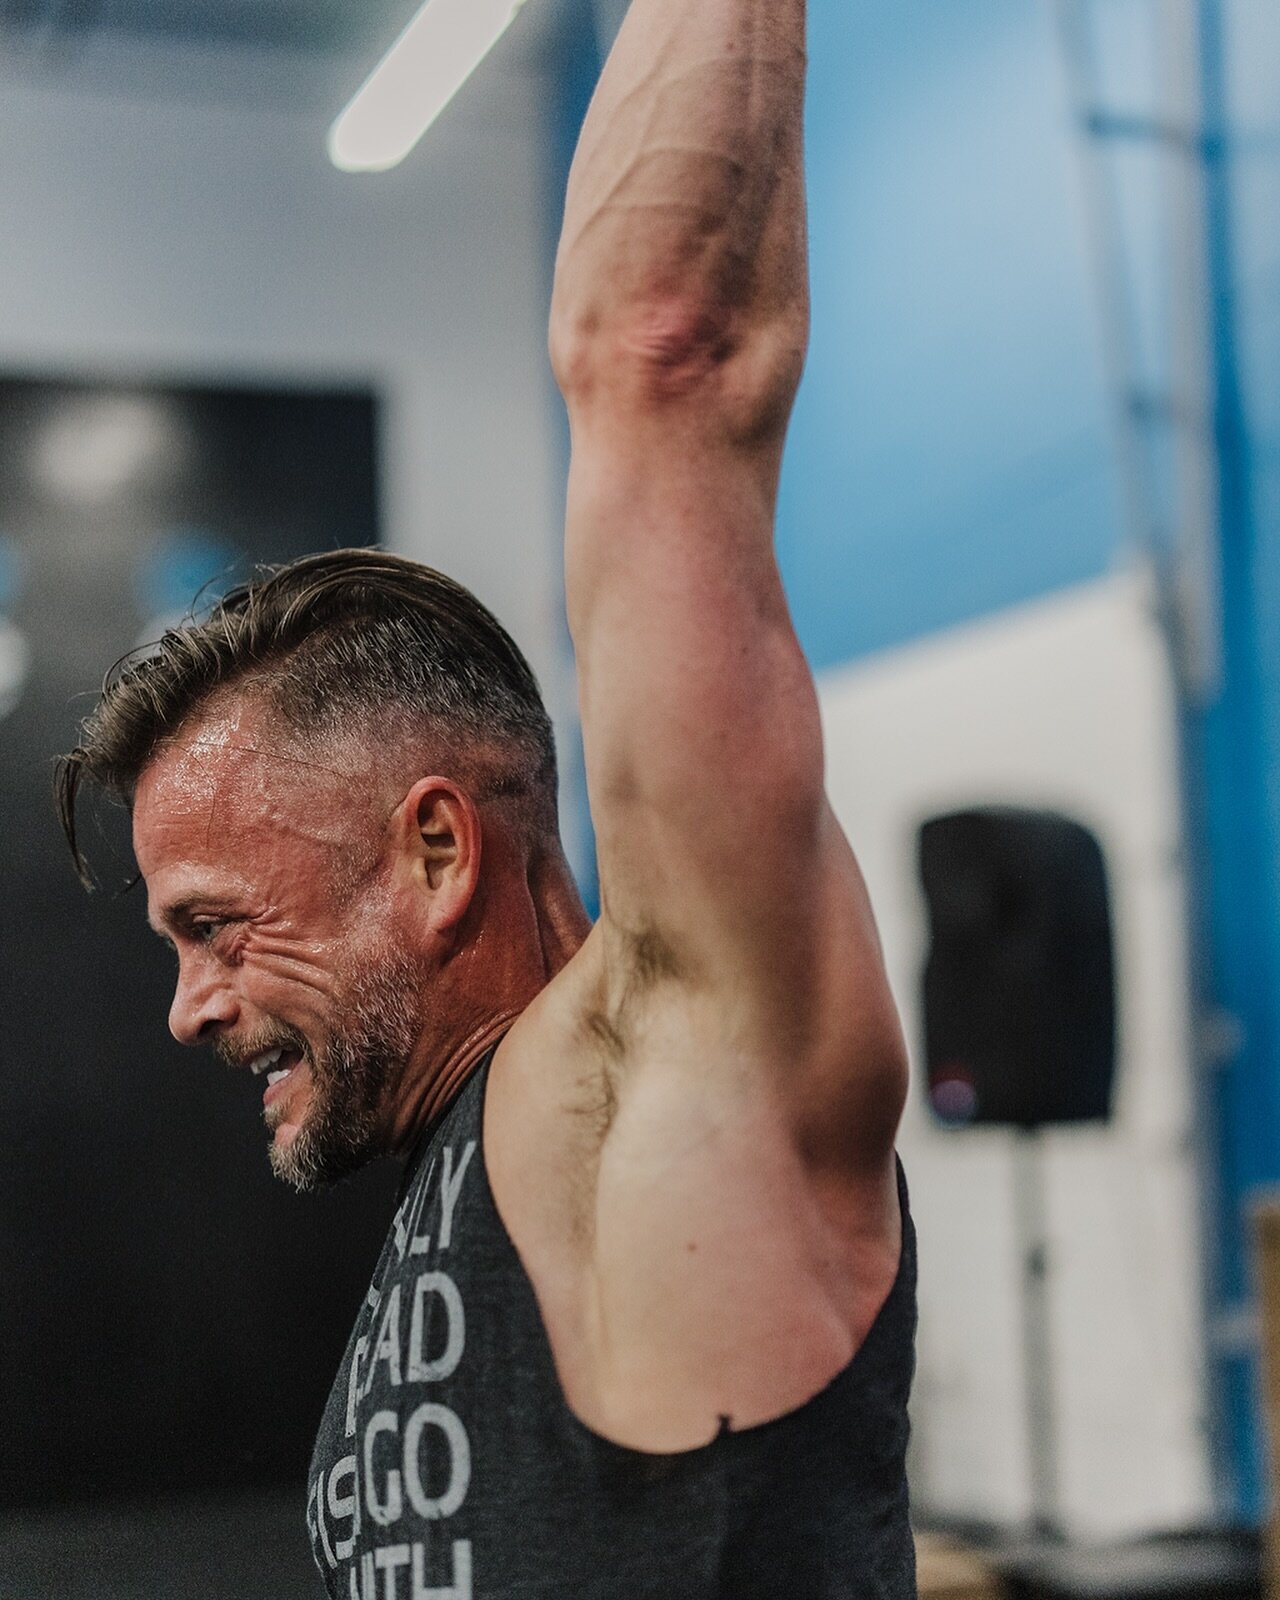 Day 2 is a wrap! 

Folks finished off the evening with a doozy. 

For time: 

20 shuttle runs 
40 chest 2 bar pullups
40 alt db snatch 70/50
20 shuttle runs
30 c2b pull-ups 
30 alt db snatch 
20 shuttle runs 
20 c2b pull-ups 
20 alt db snatch 

Top S